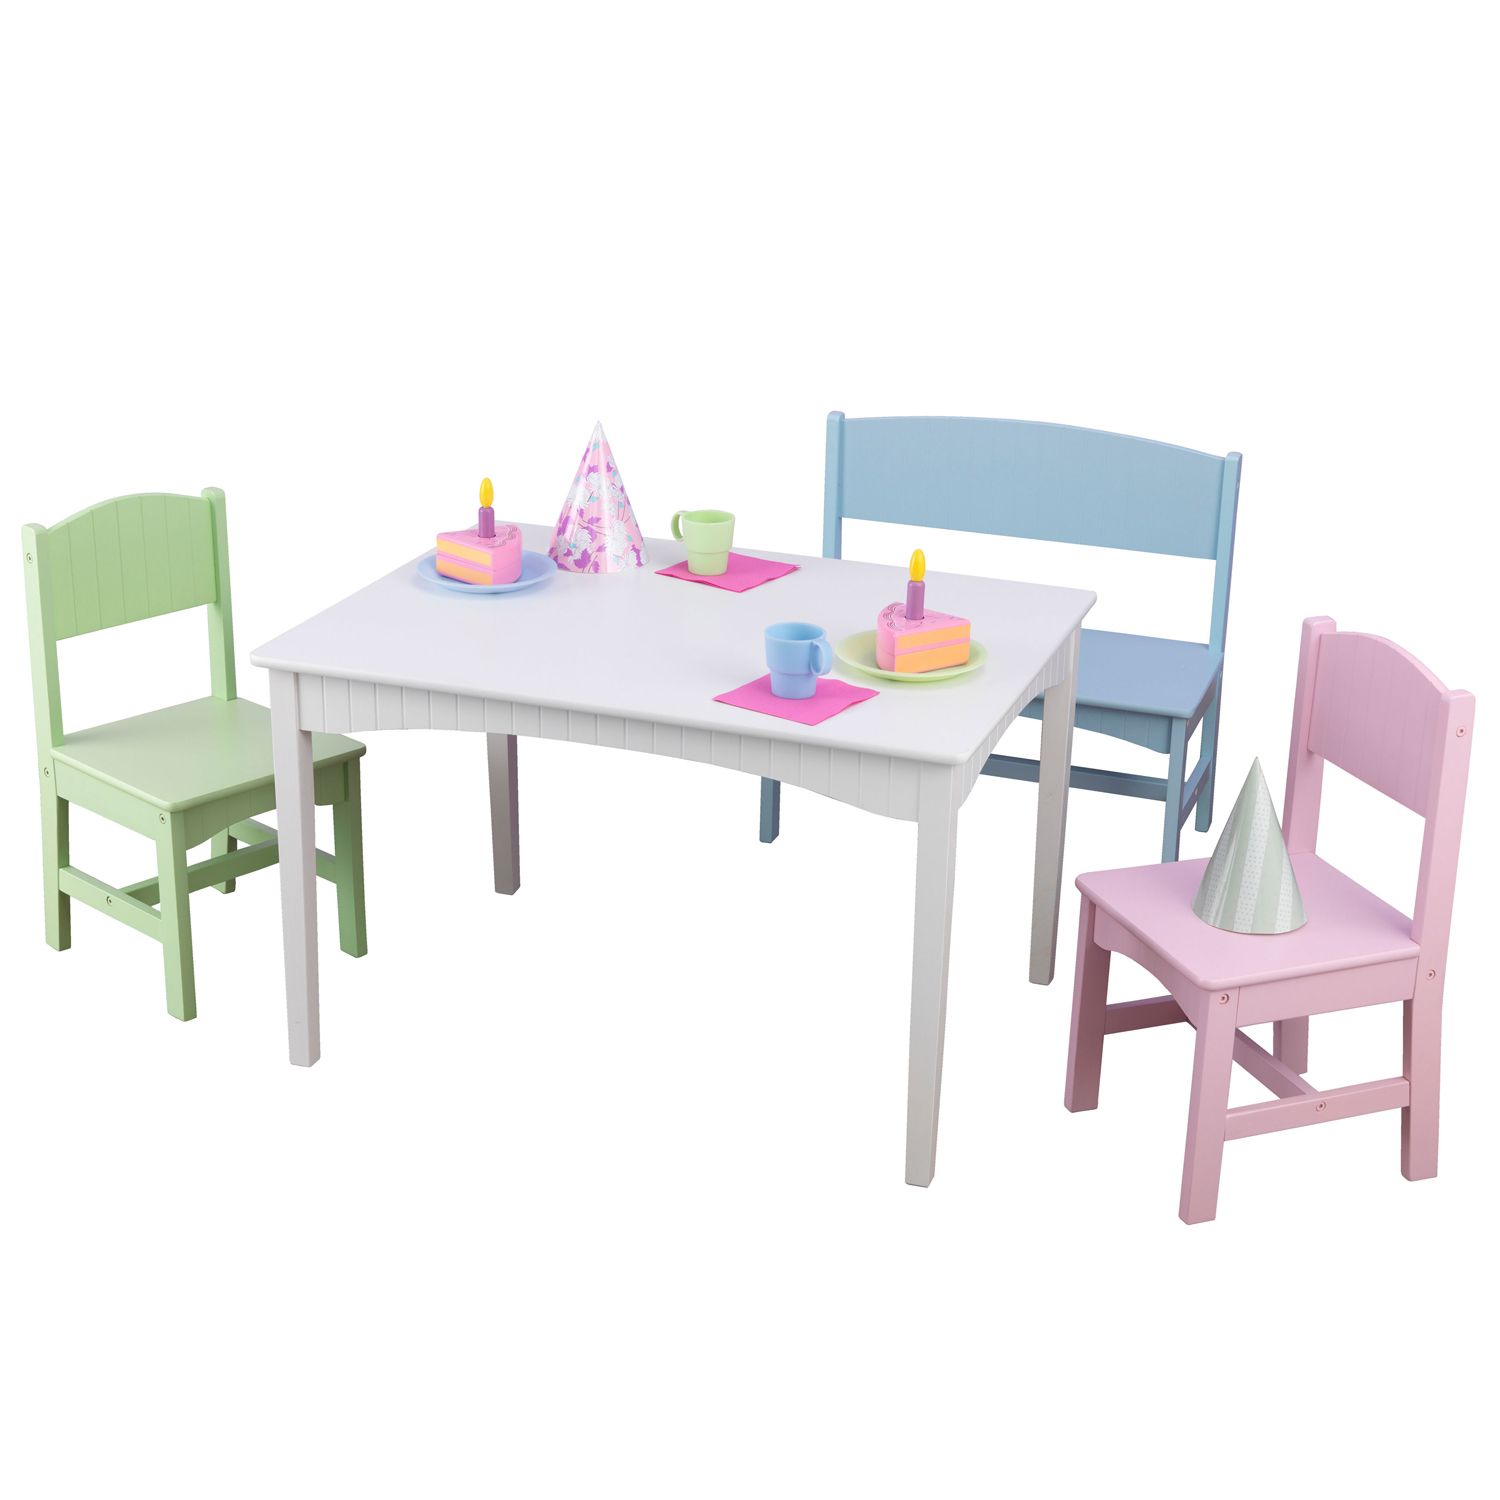 crayola wooden table & chair set